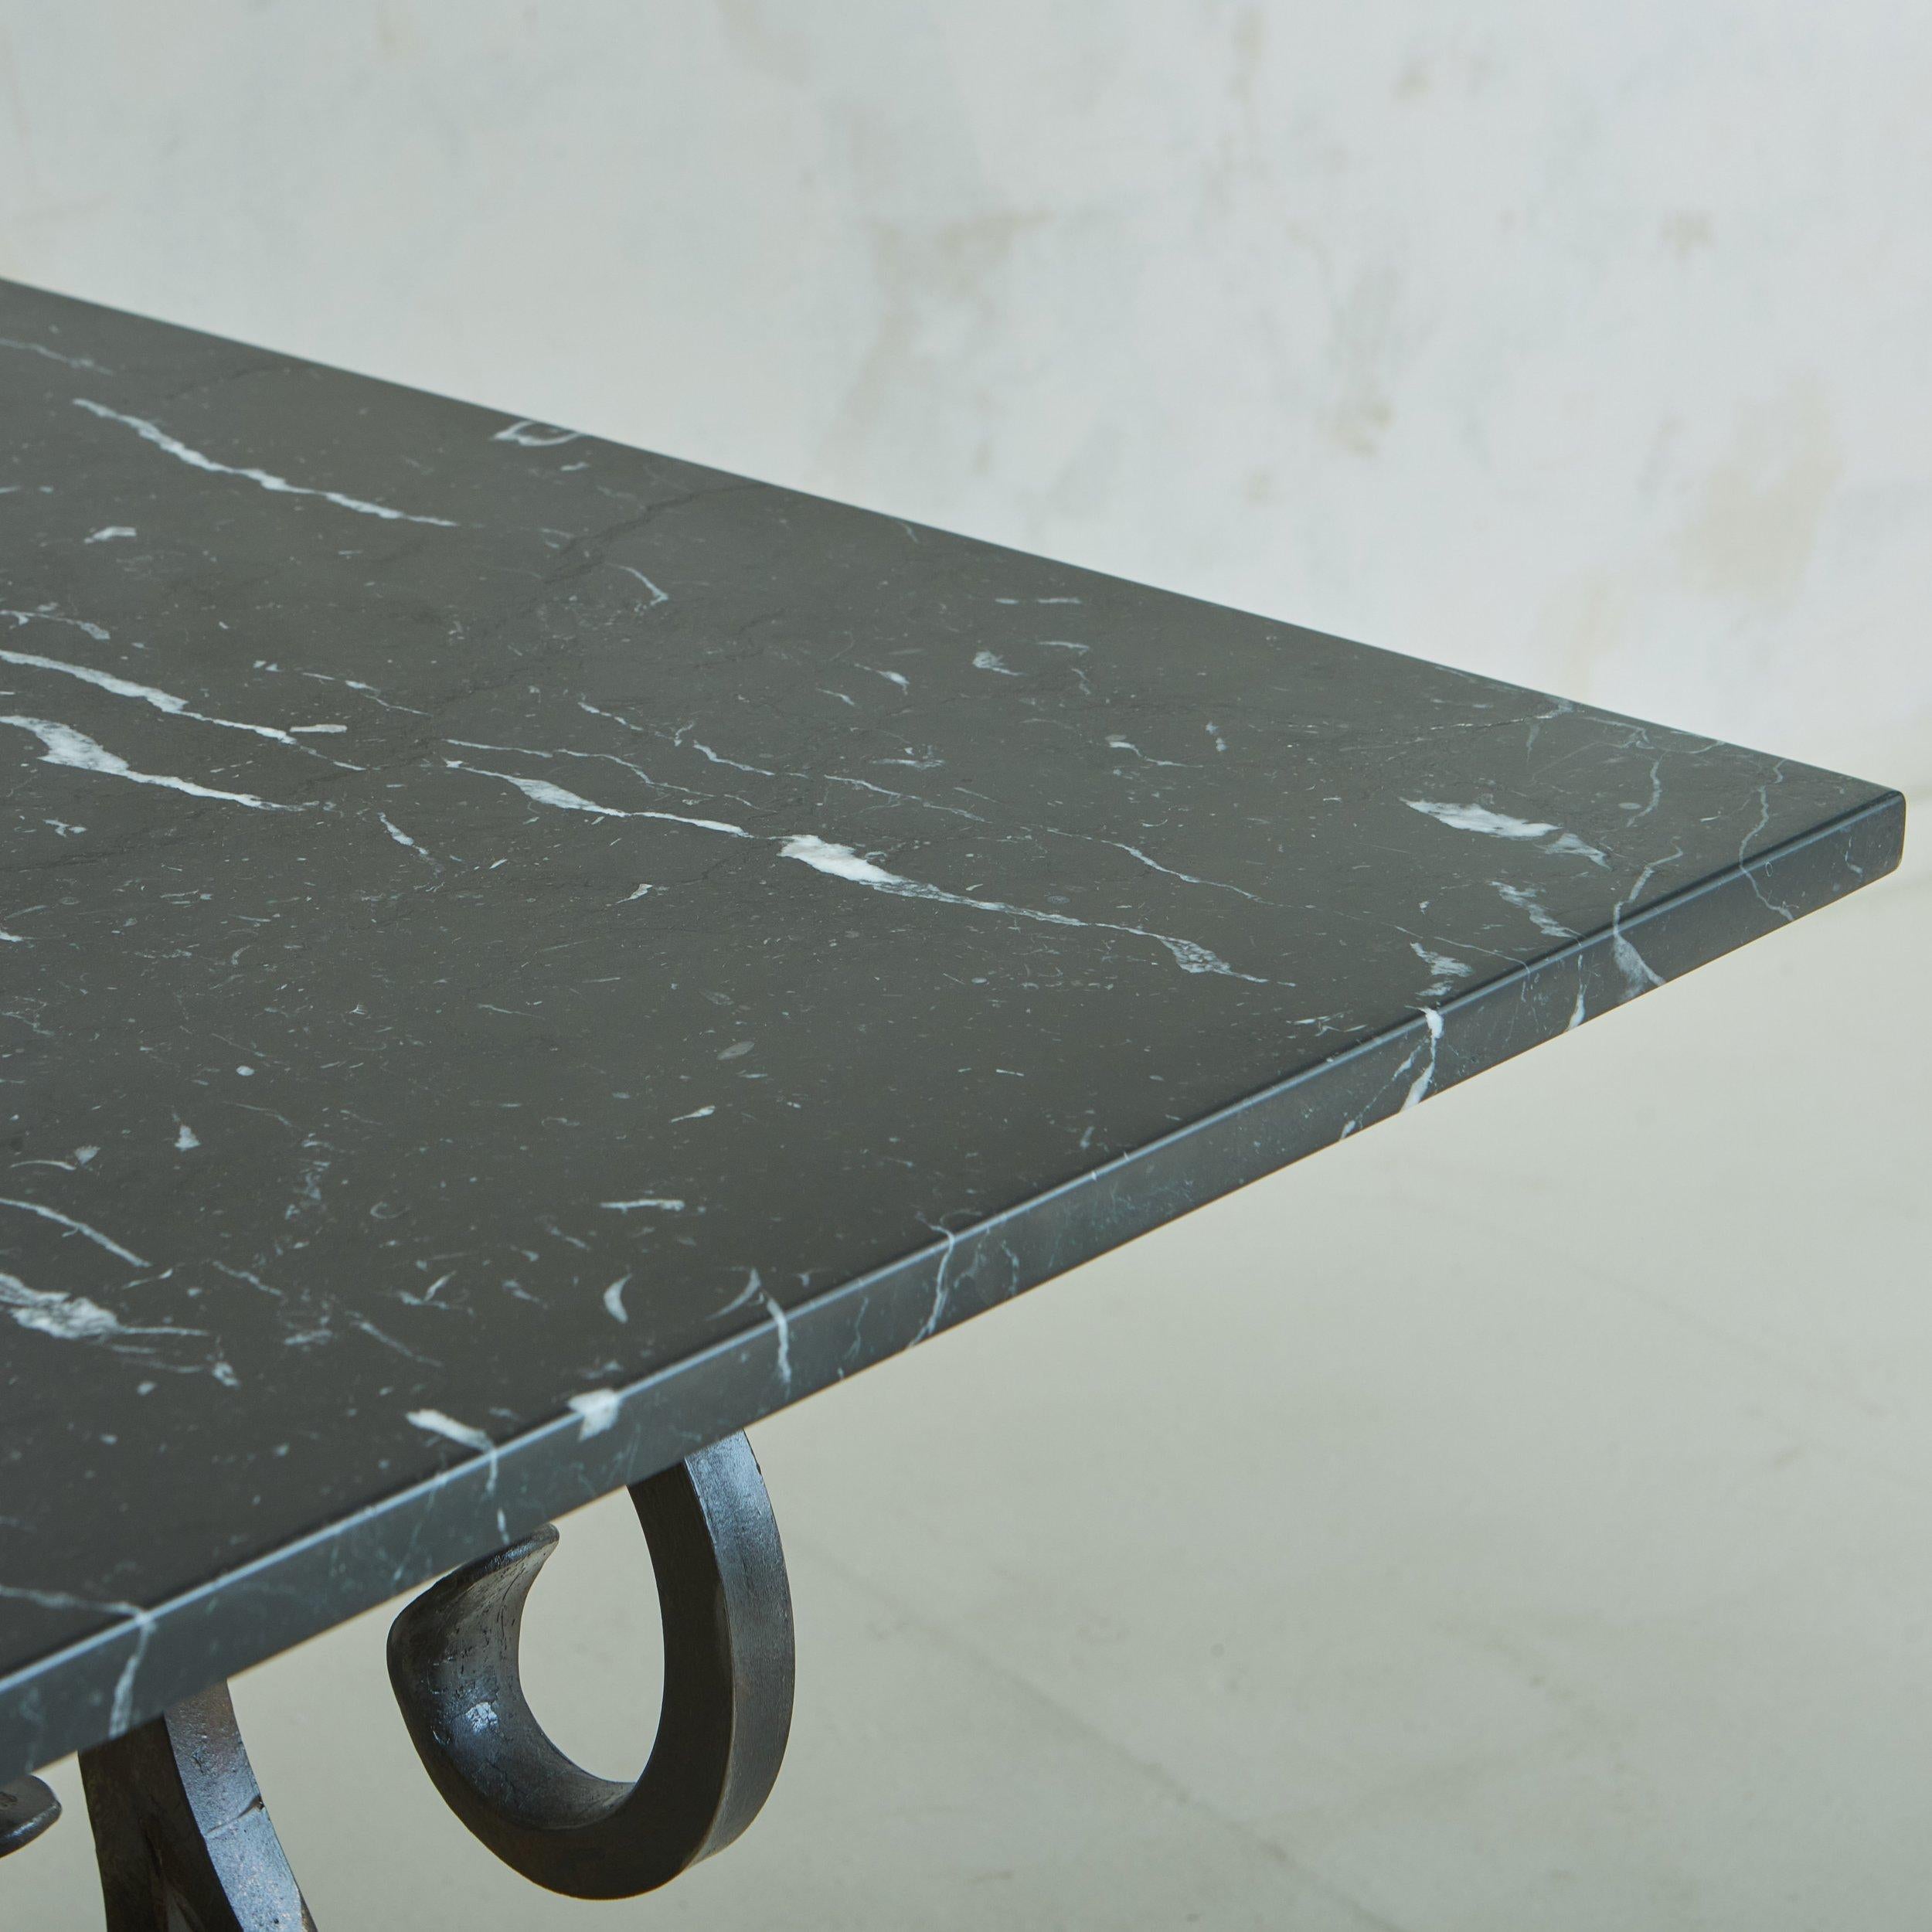 Nero Marquina Marble Dining Table with Wrought Iron Base, France 19th Century For Sale 3